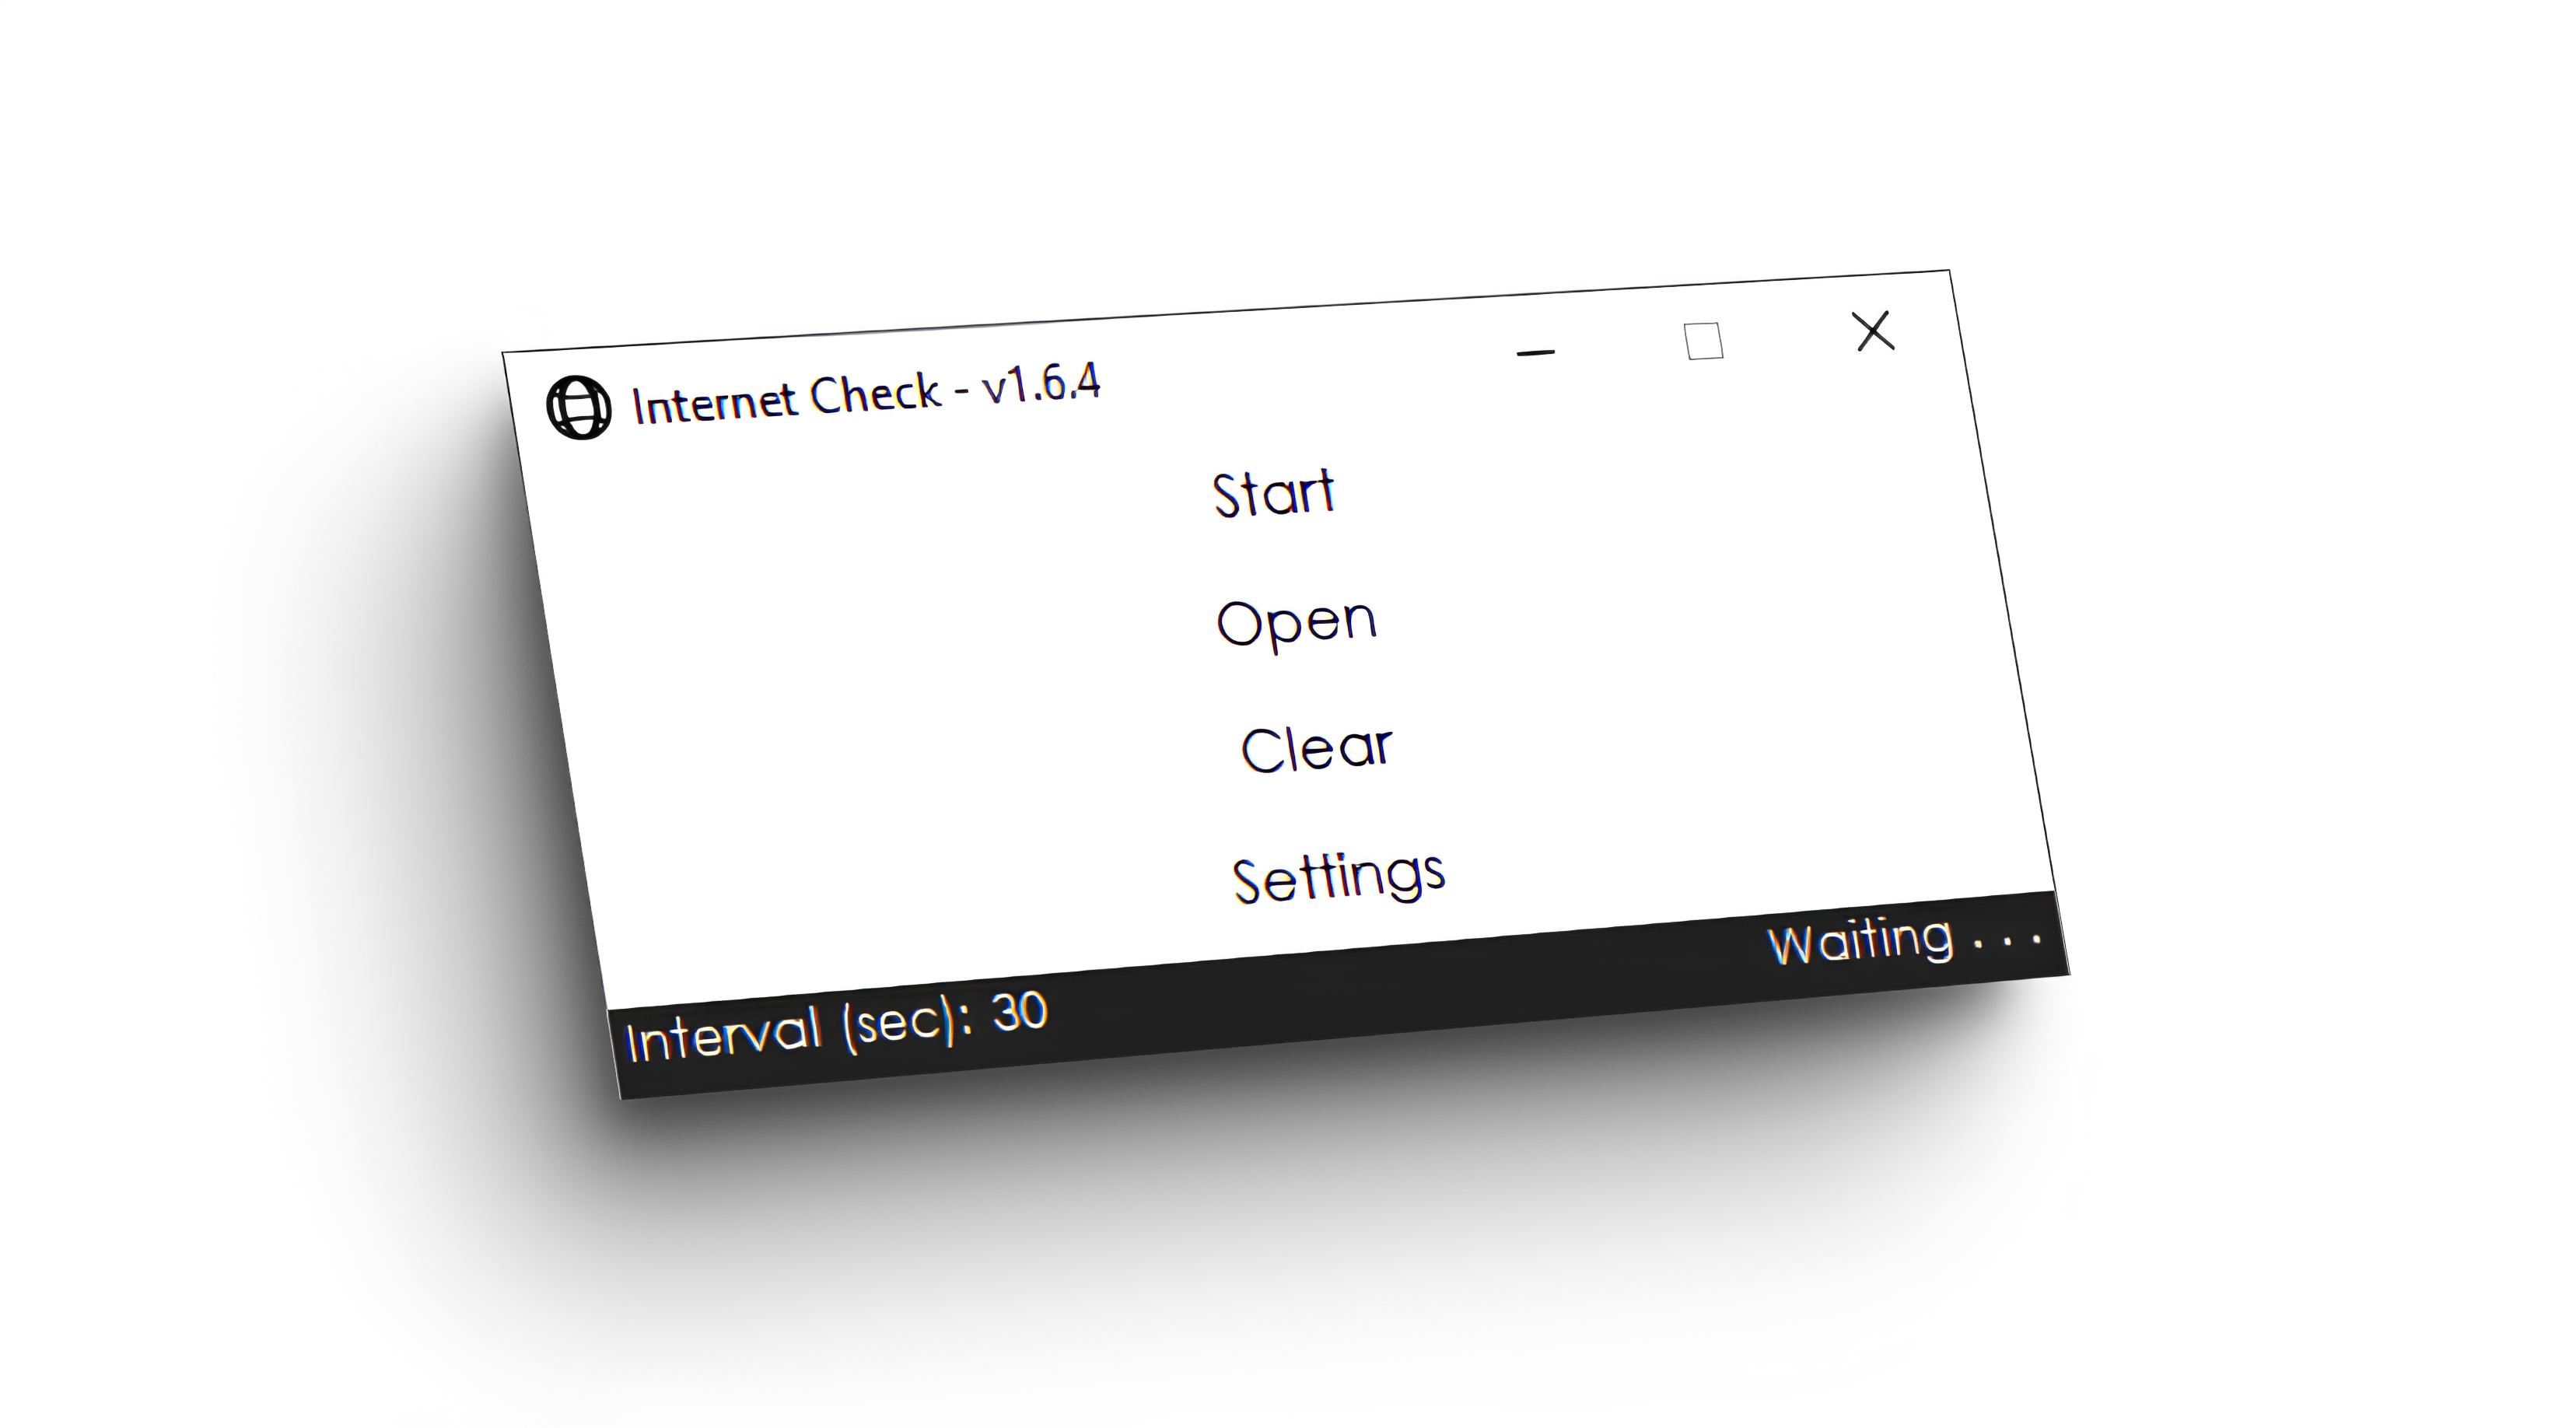 Mockup of software recording internet downtime. The program has a simple UI in white at the top and black at the bottom with white taking up most of the interface. The main form is made up of 4 buttons: Start, Open, Clear and Settings. At the bottom there are two elements: Interval (sec): 30 and Waiting... .